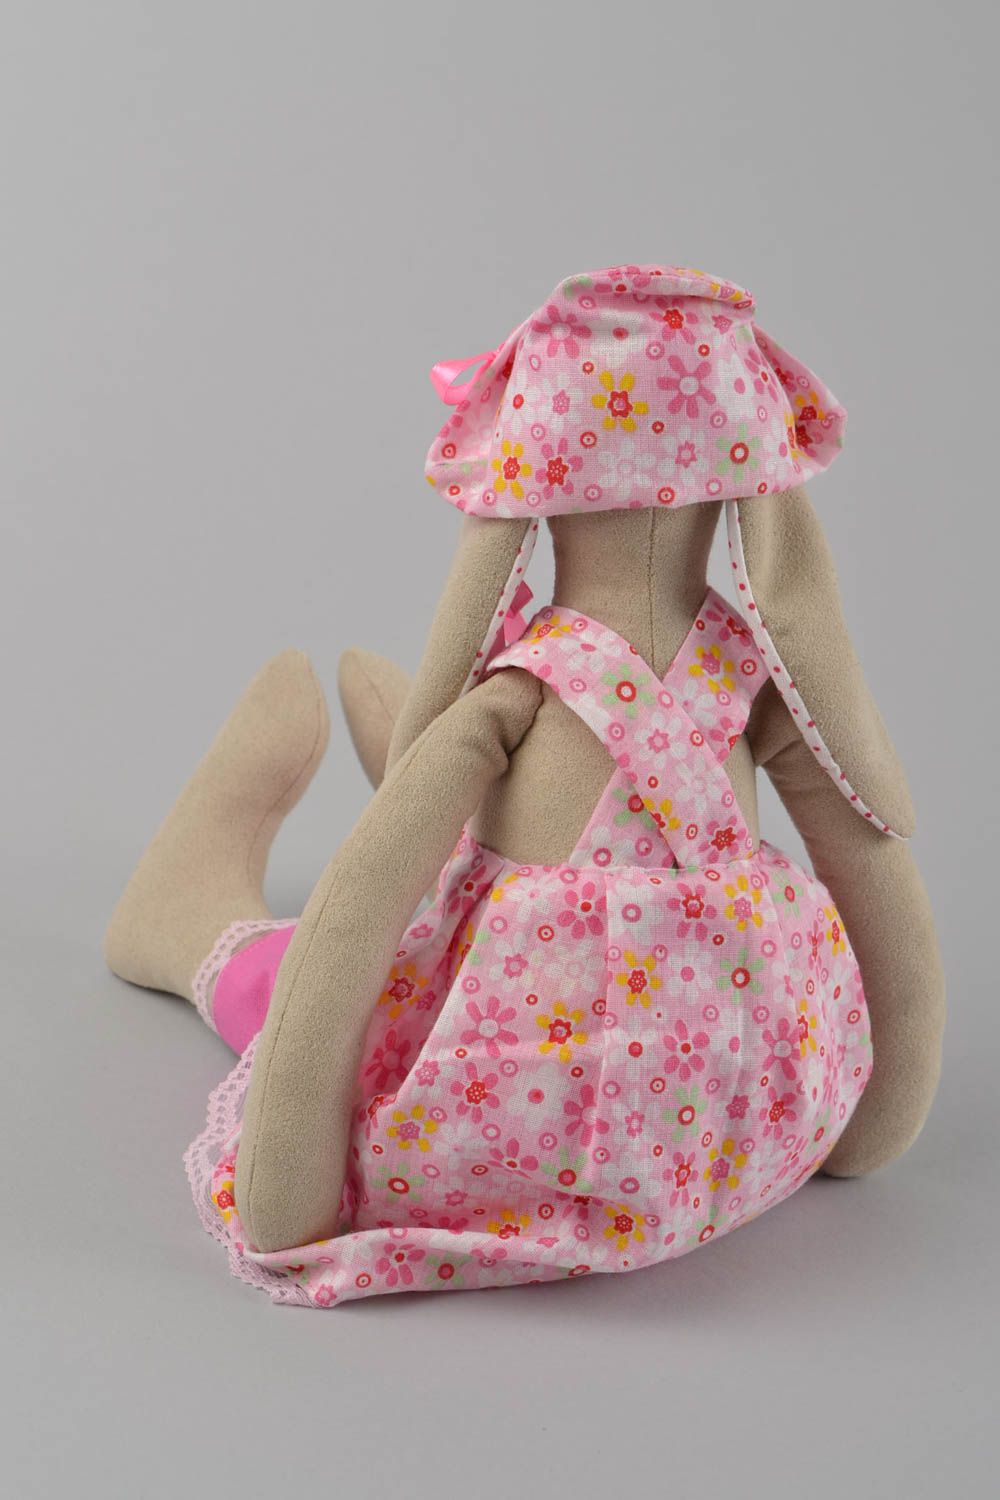 Handmade designer fabric soft toy rabbit in pink dress and hat for interior  photo 5